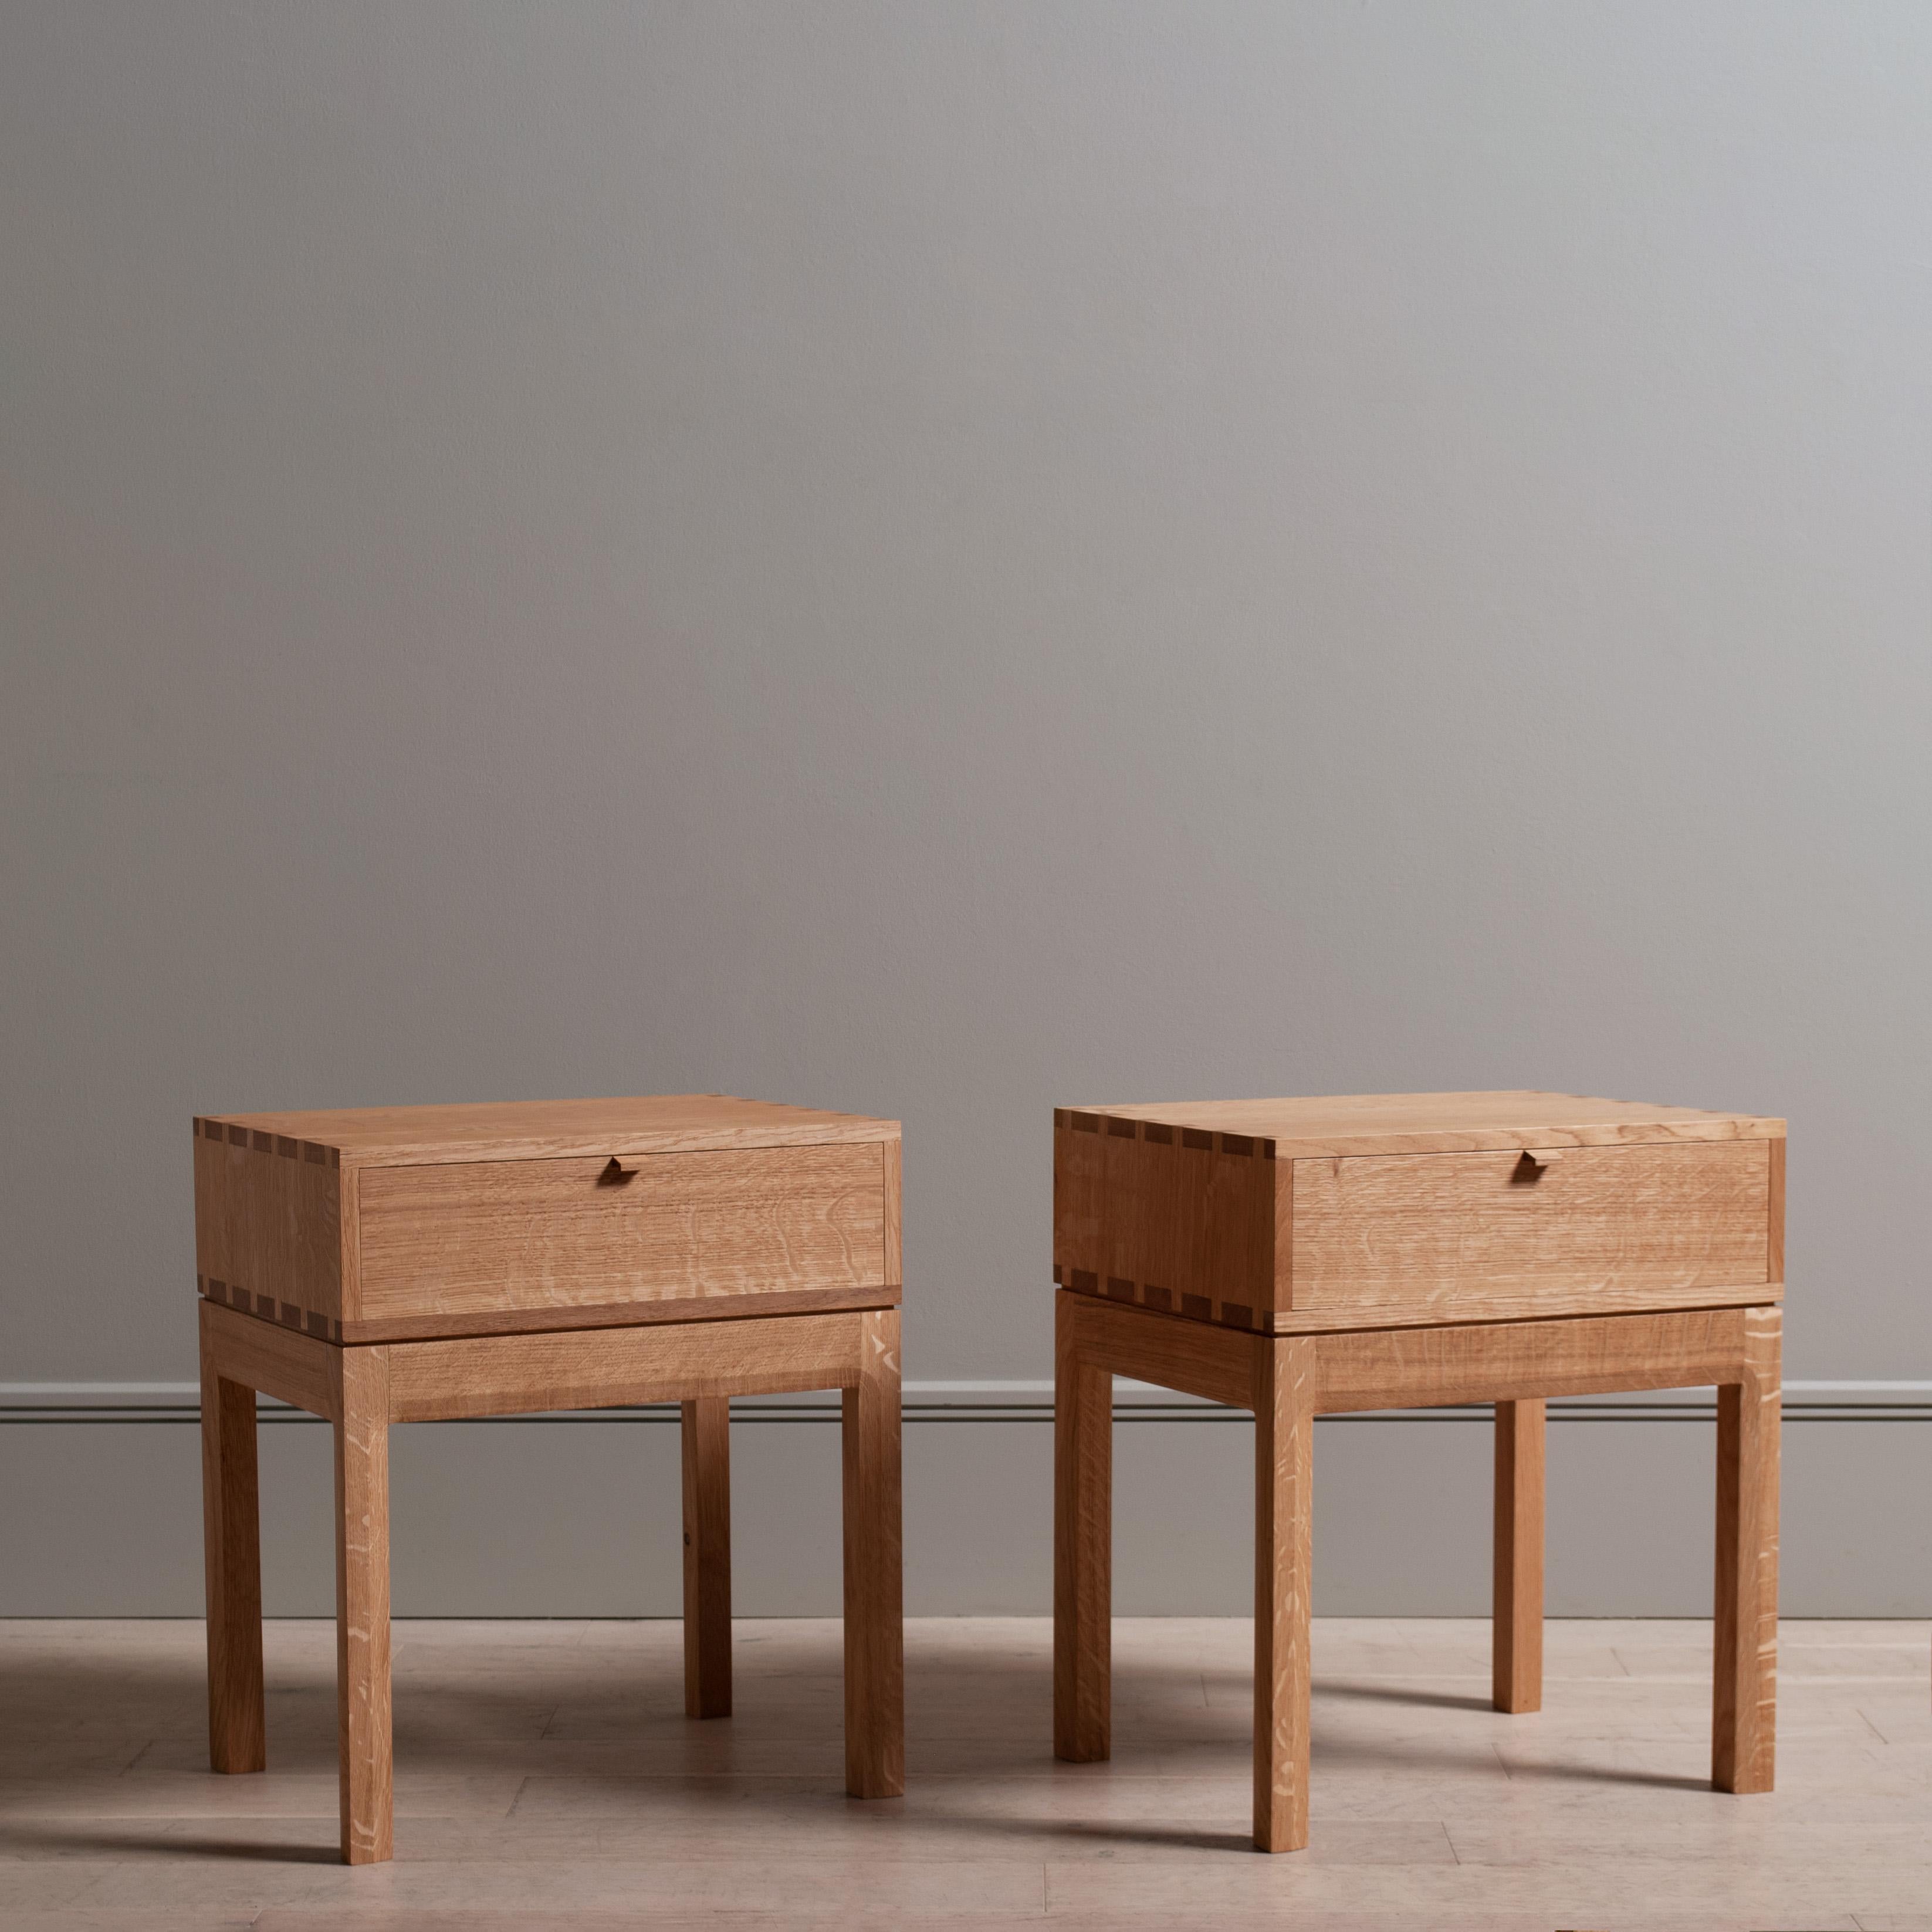 A pair of English quarter-sawn oak hand-crafted end tables in the modernist style. Constructed from finest English oak including all the internal dovetail jointed drawer and carcass. The upper box is detailed with exposed structural hand-cut